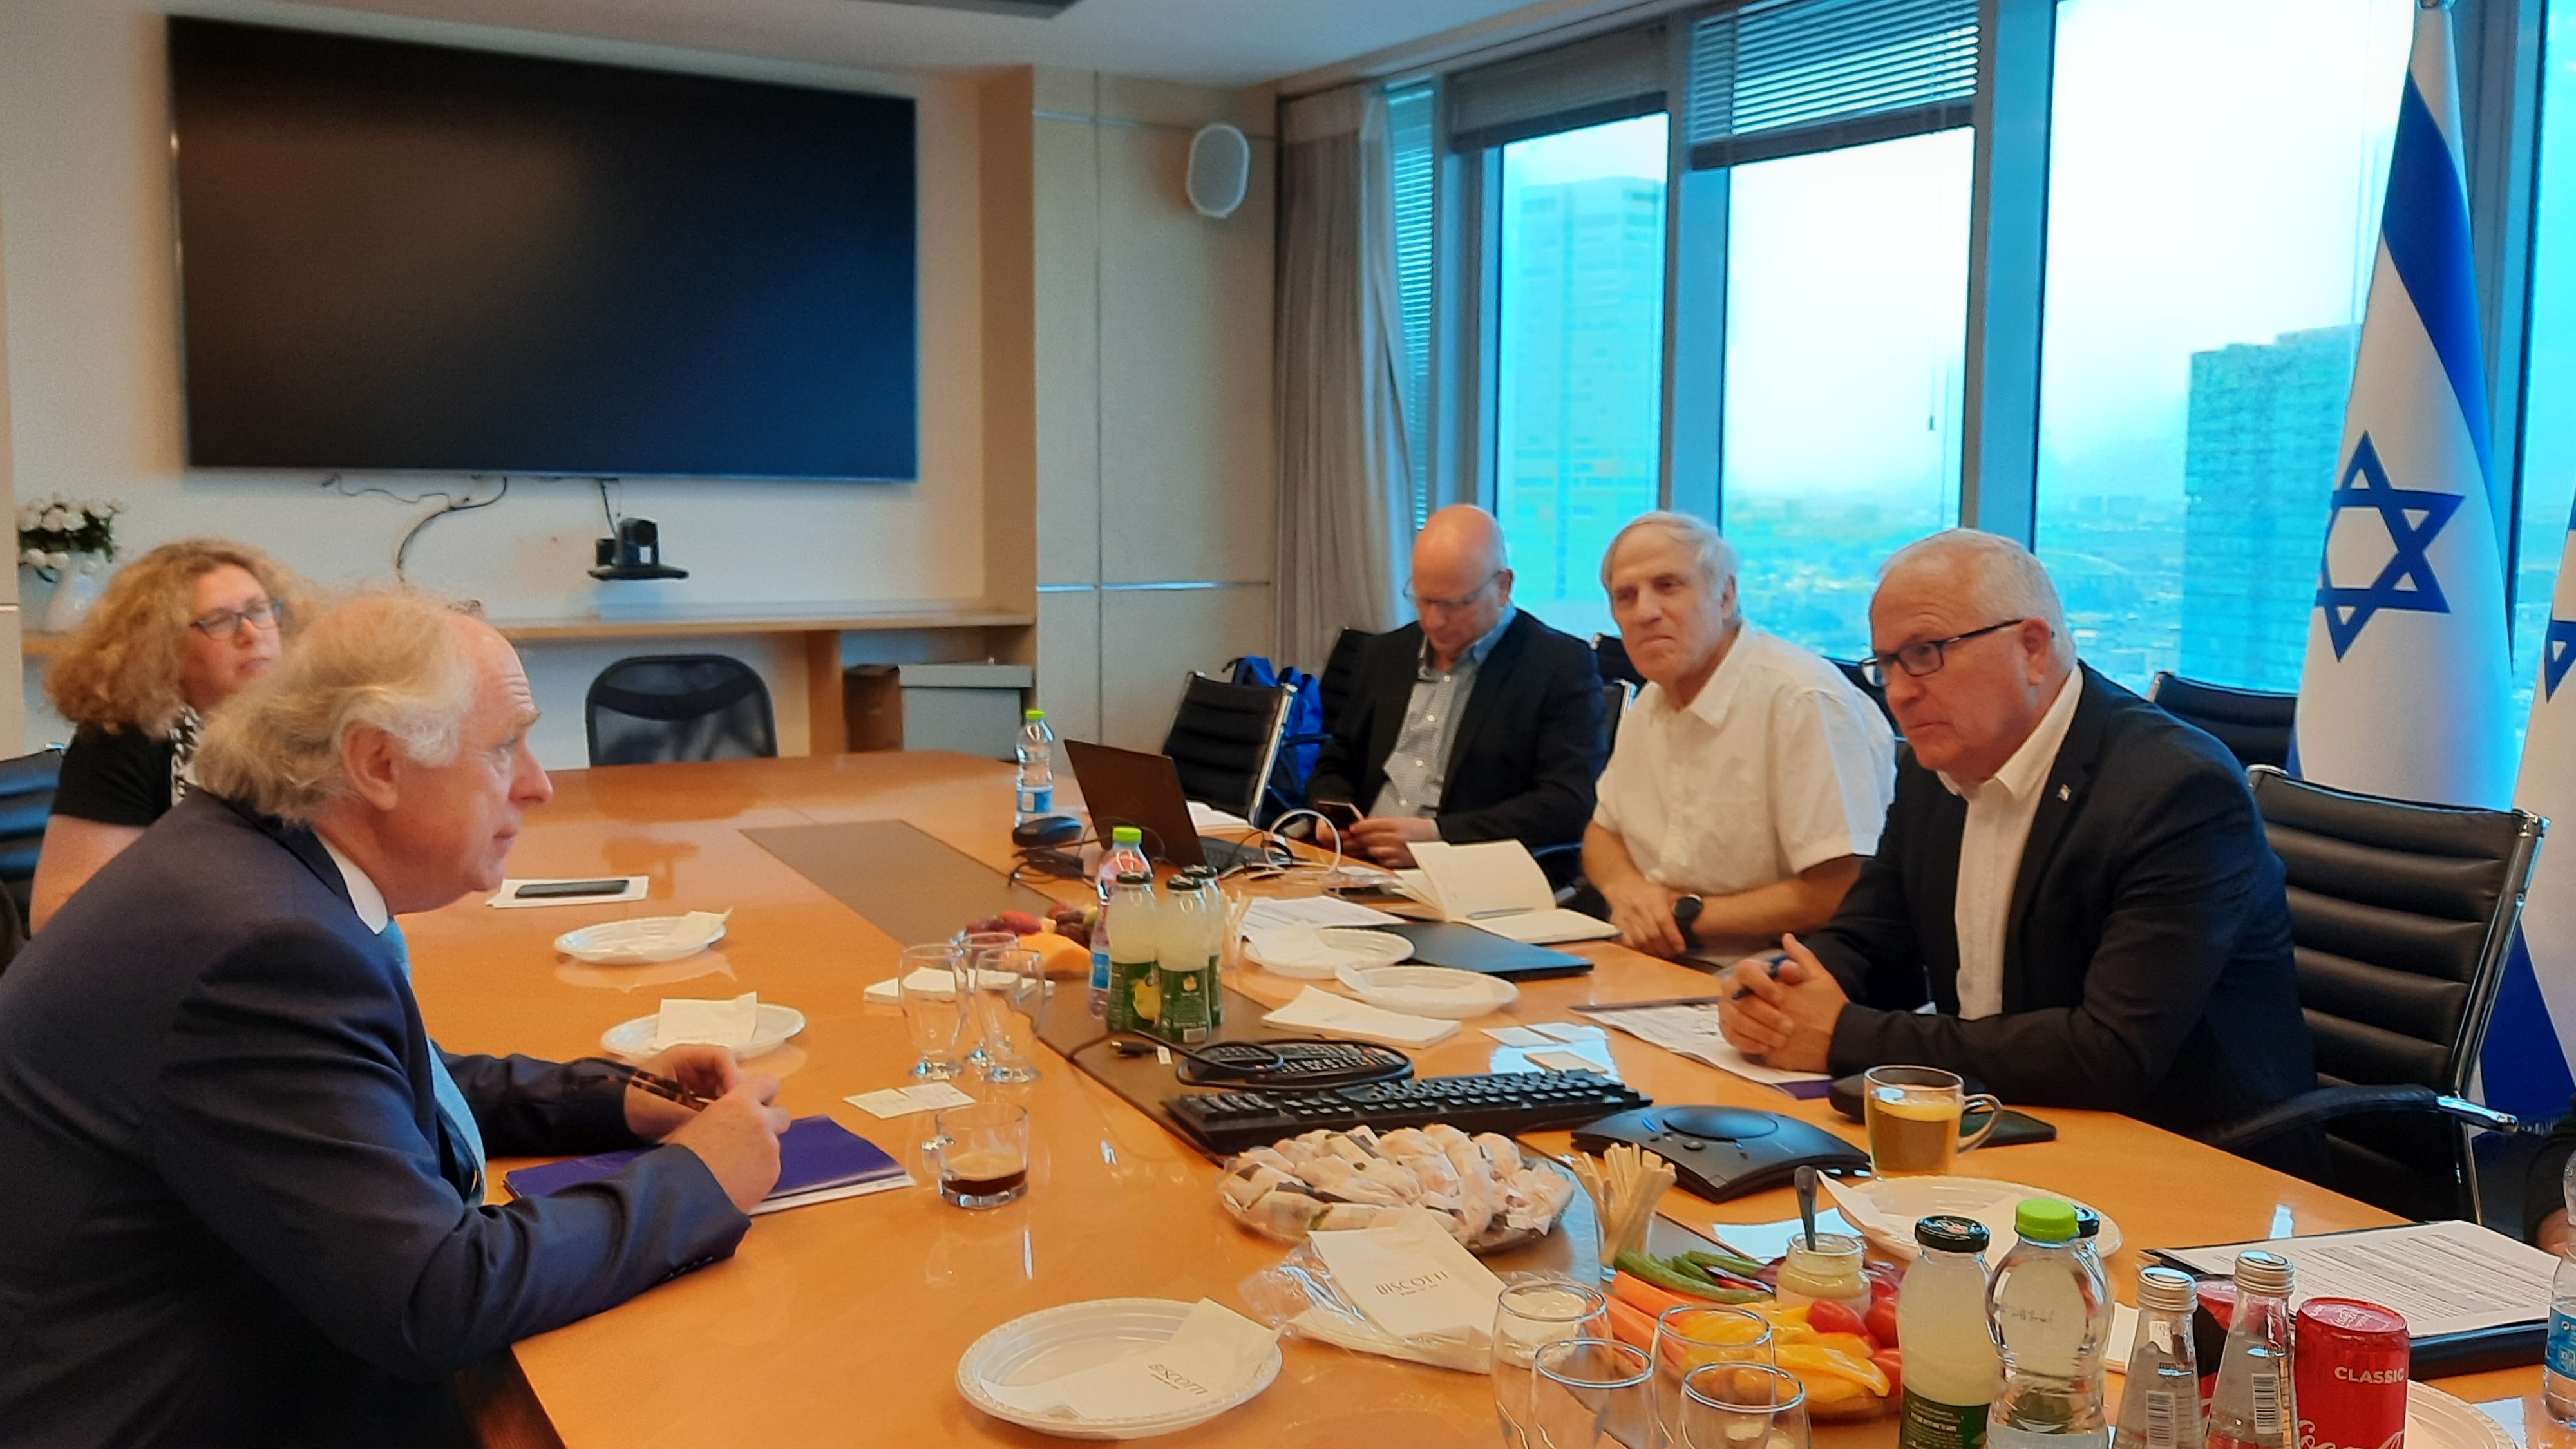 Diplomatic meeting between HFSPO and MOST, the Israeli Ministry of Science and Technology.